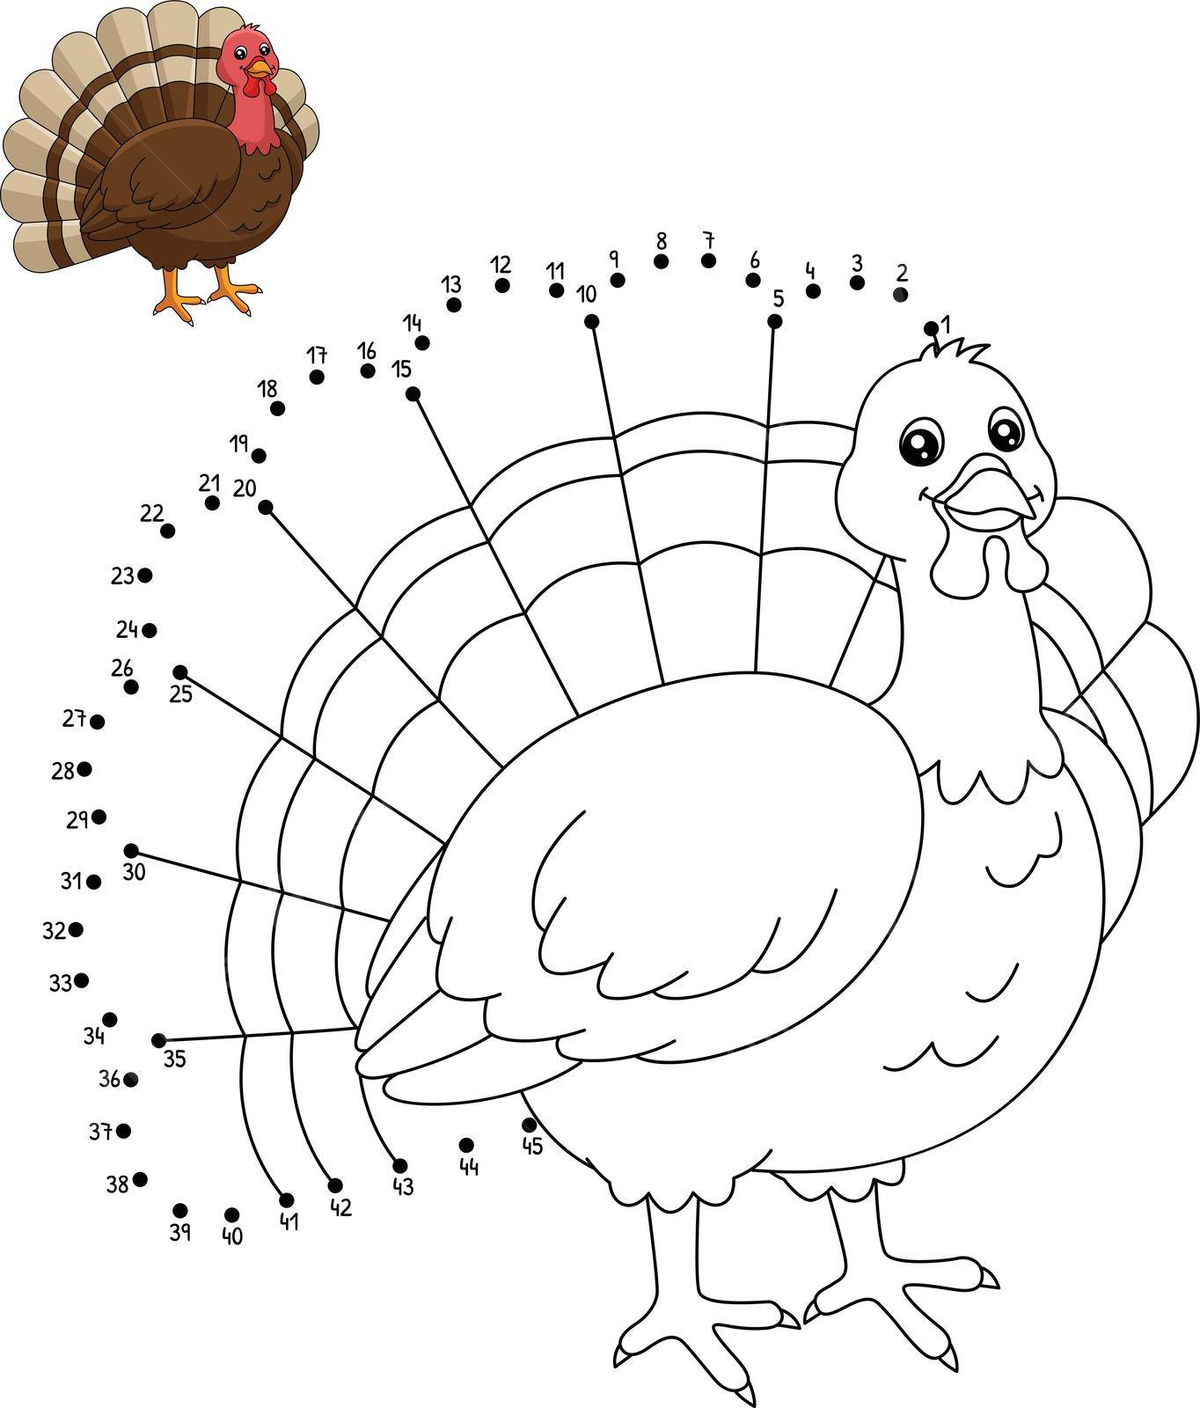 Connect the dots turkey coloring page for cldren vector kids color design png and vector with transparent background for free download